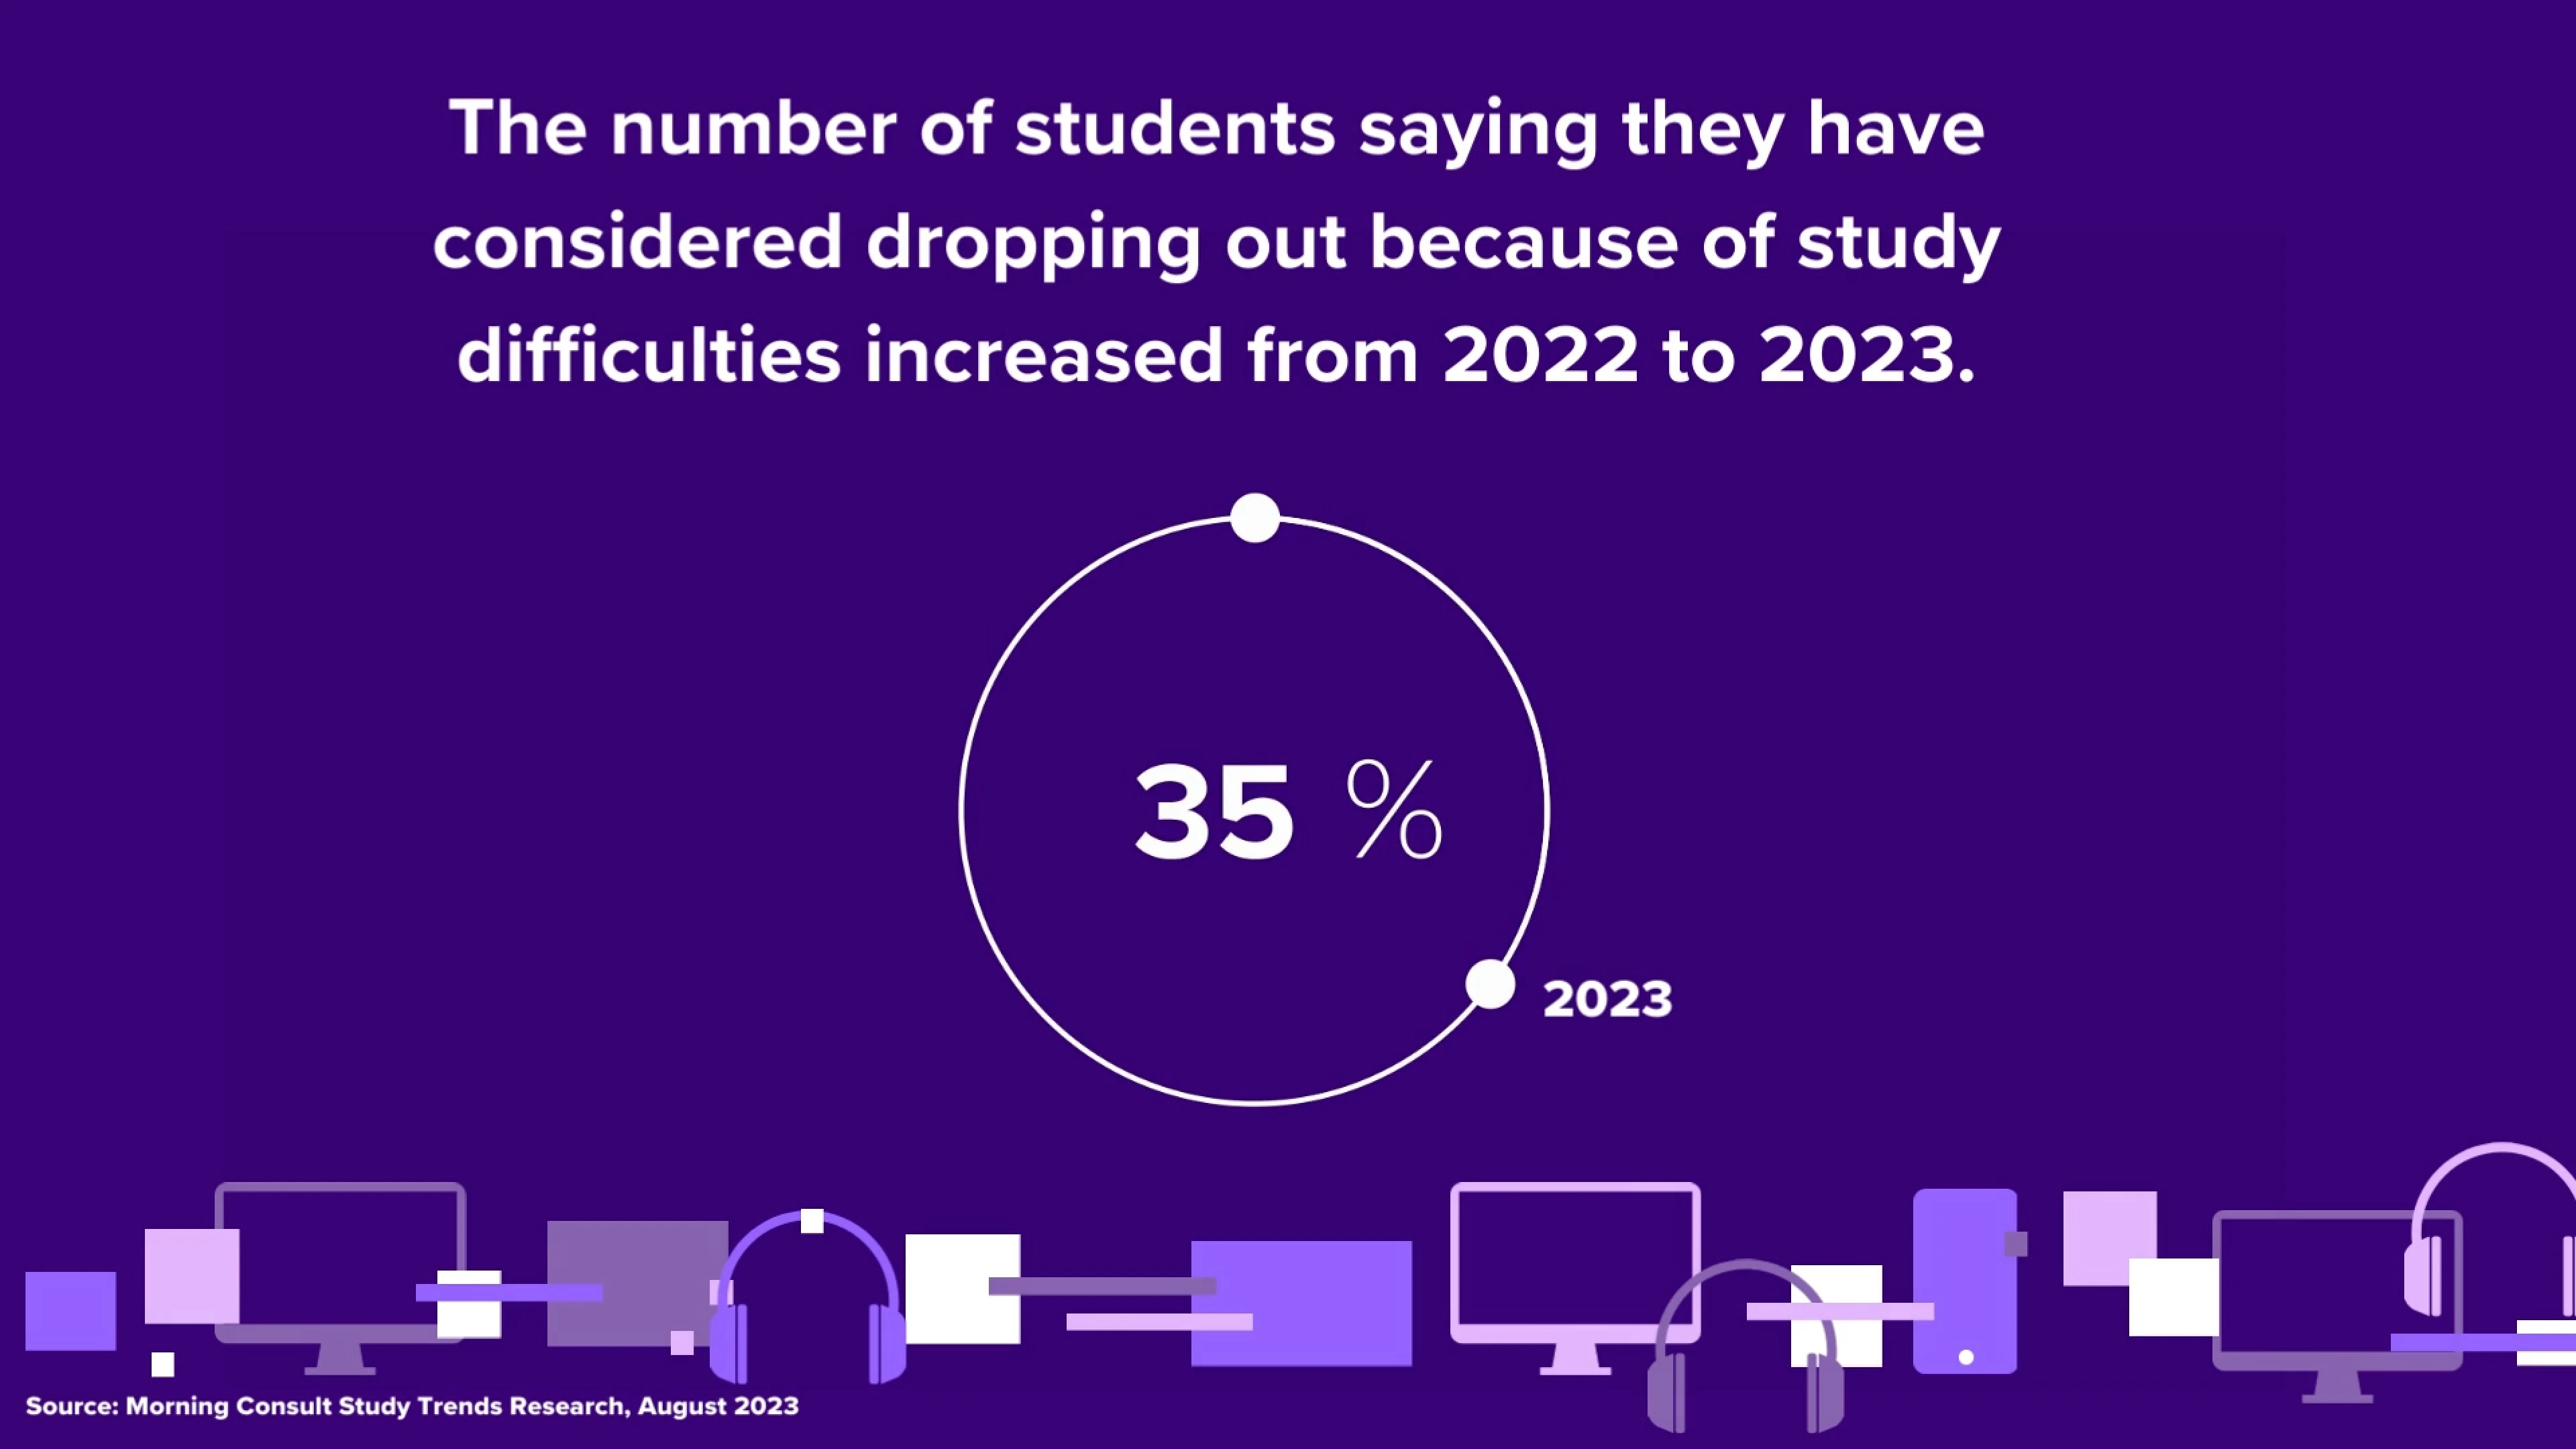 the number of students saying they have considered dropping out because of study difficulties increased from 2022 to 2023 (26% to 35%)